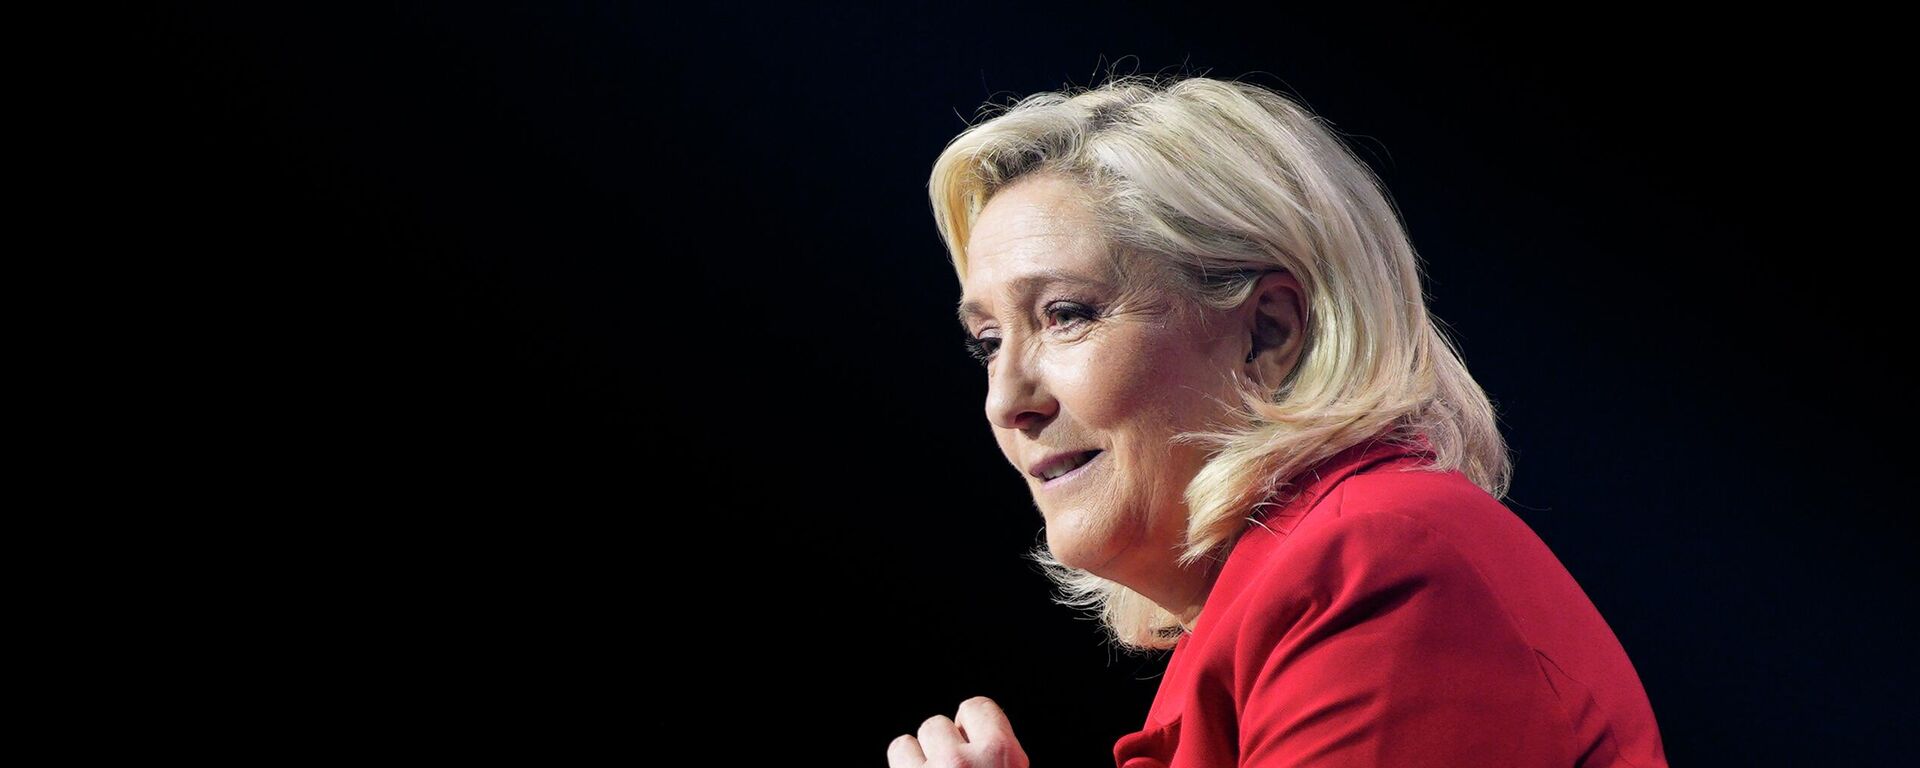 French right-wing politician Marine Le Pen delivers a speech during a meeting in Avignon, south of France, Thursday, April 14, 2022. Le Pen is trying to unseat centrist President Emmanuel Macron, who has a slim lead in polls ahead of France's April 24 presidential runoff election. (AP Photo/Daniel Cole) - Sputnik International, 1920, 18.09.2022